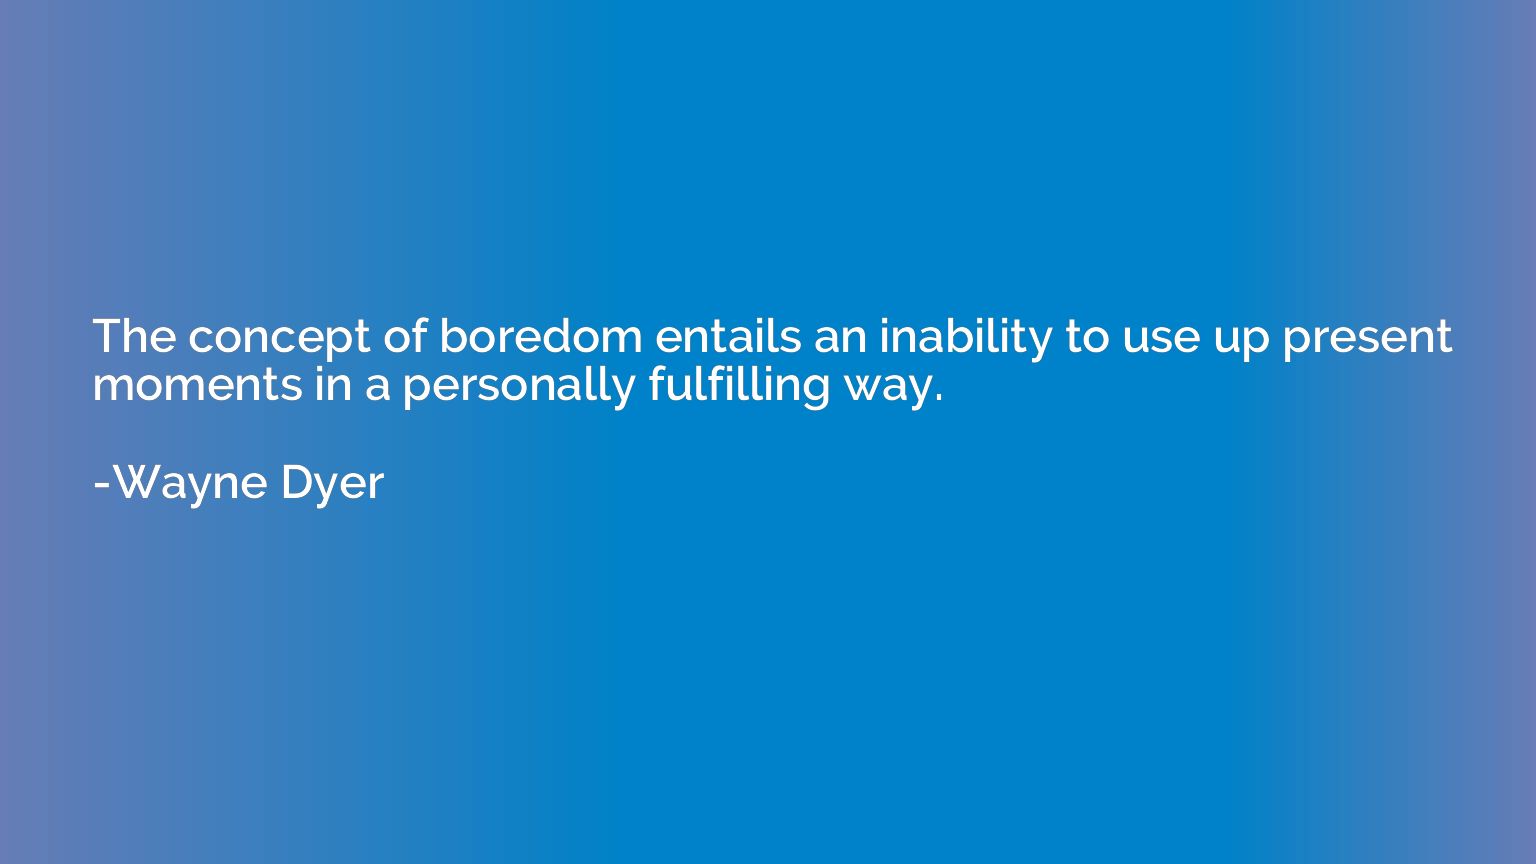 The concept of boredom entails an inability to use up presen